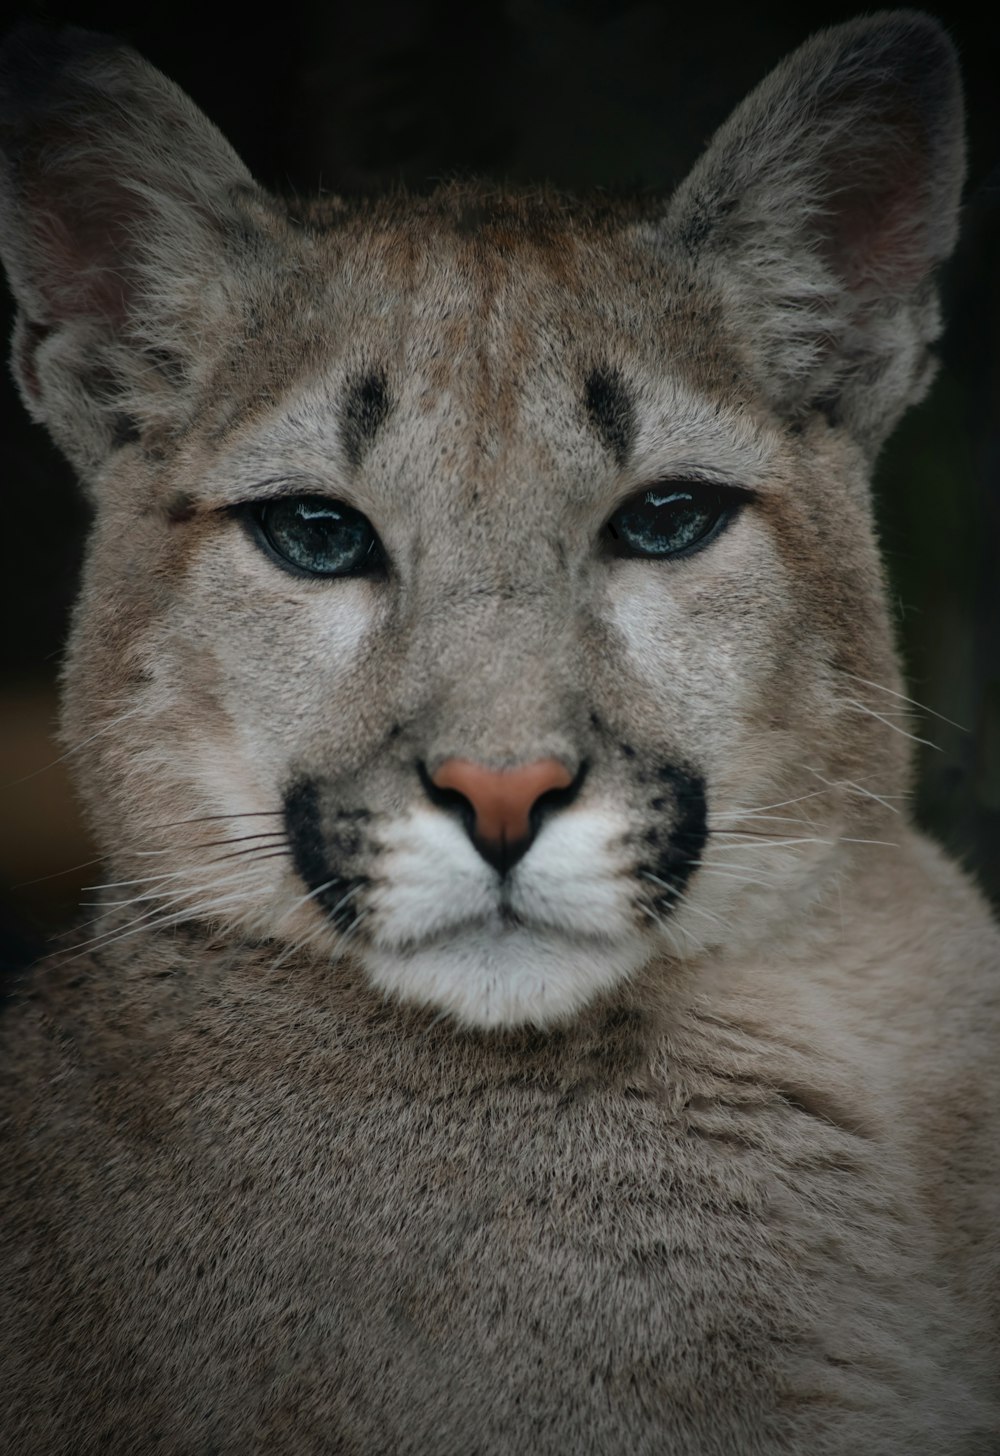 a close up of a mountain lion with blue eyes